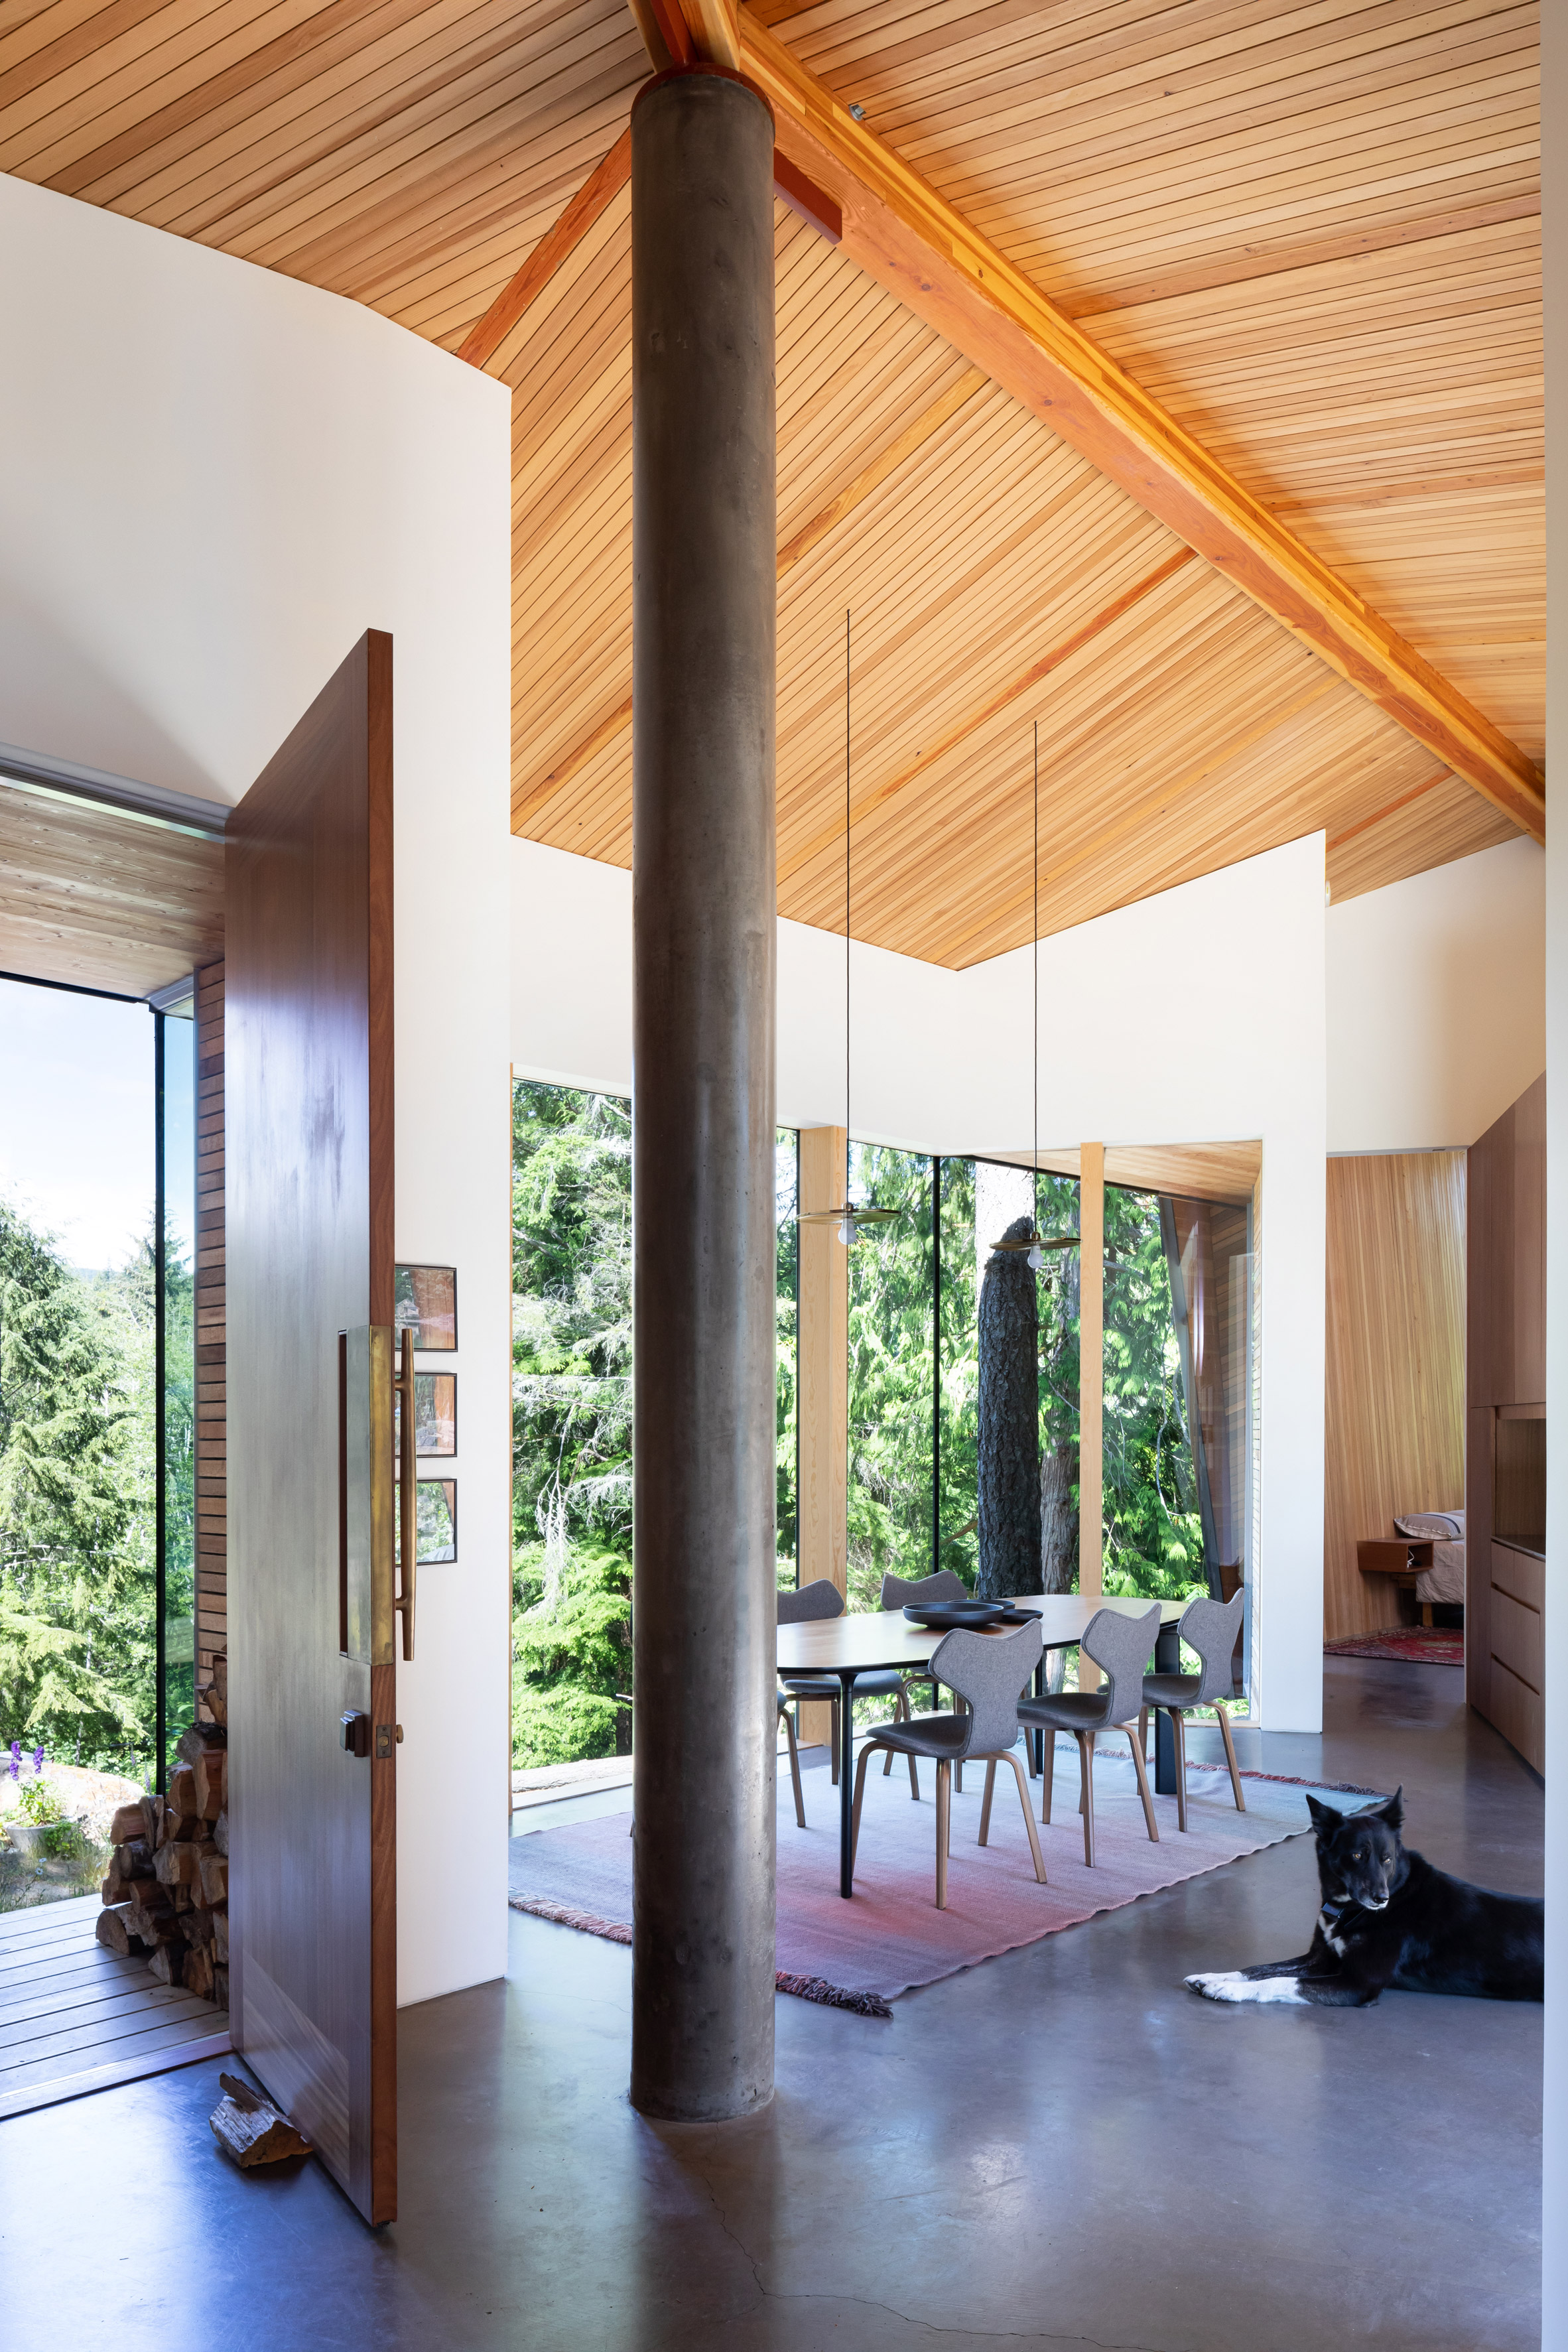 Sooke Project by Campos Studio